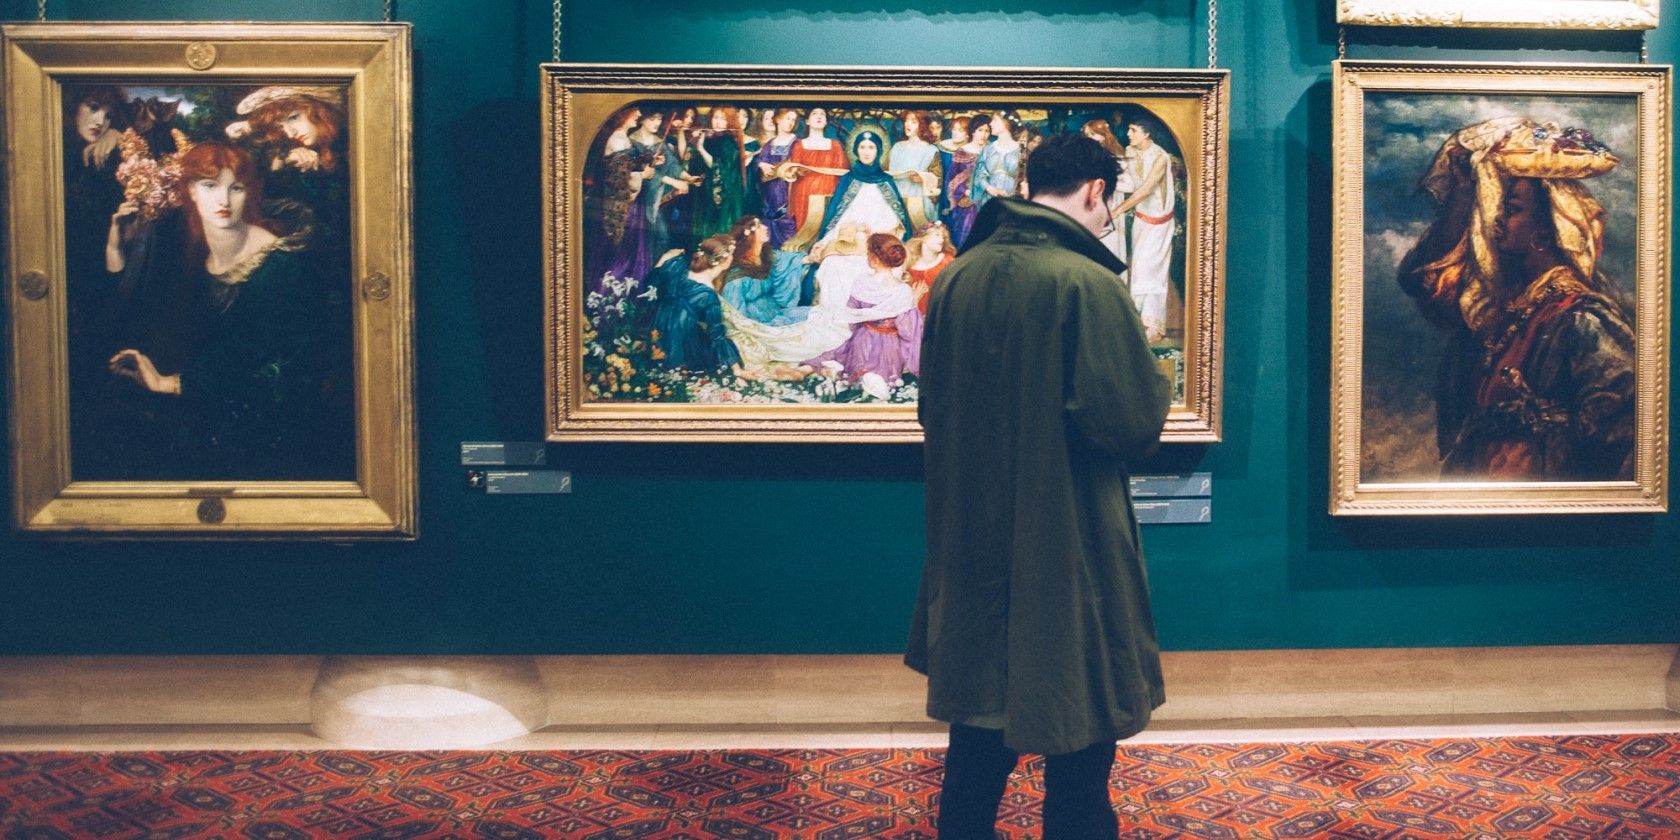 You Can Now View Virtual Museum Exhibits on Instagram